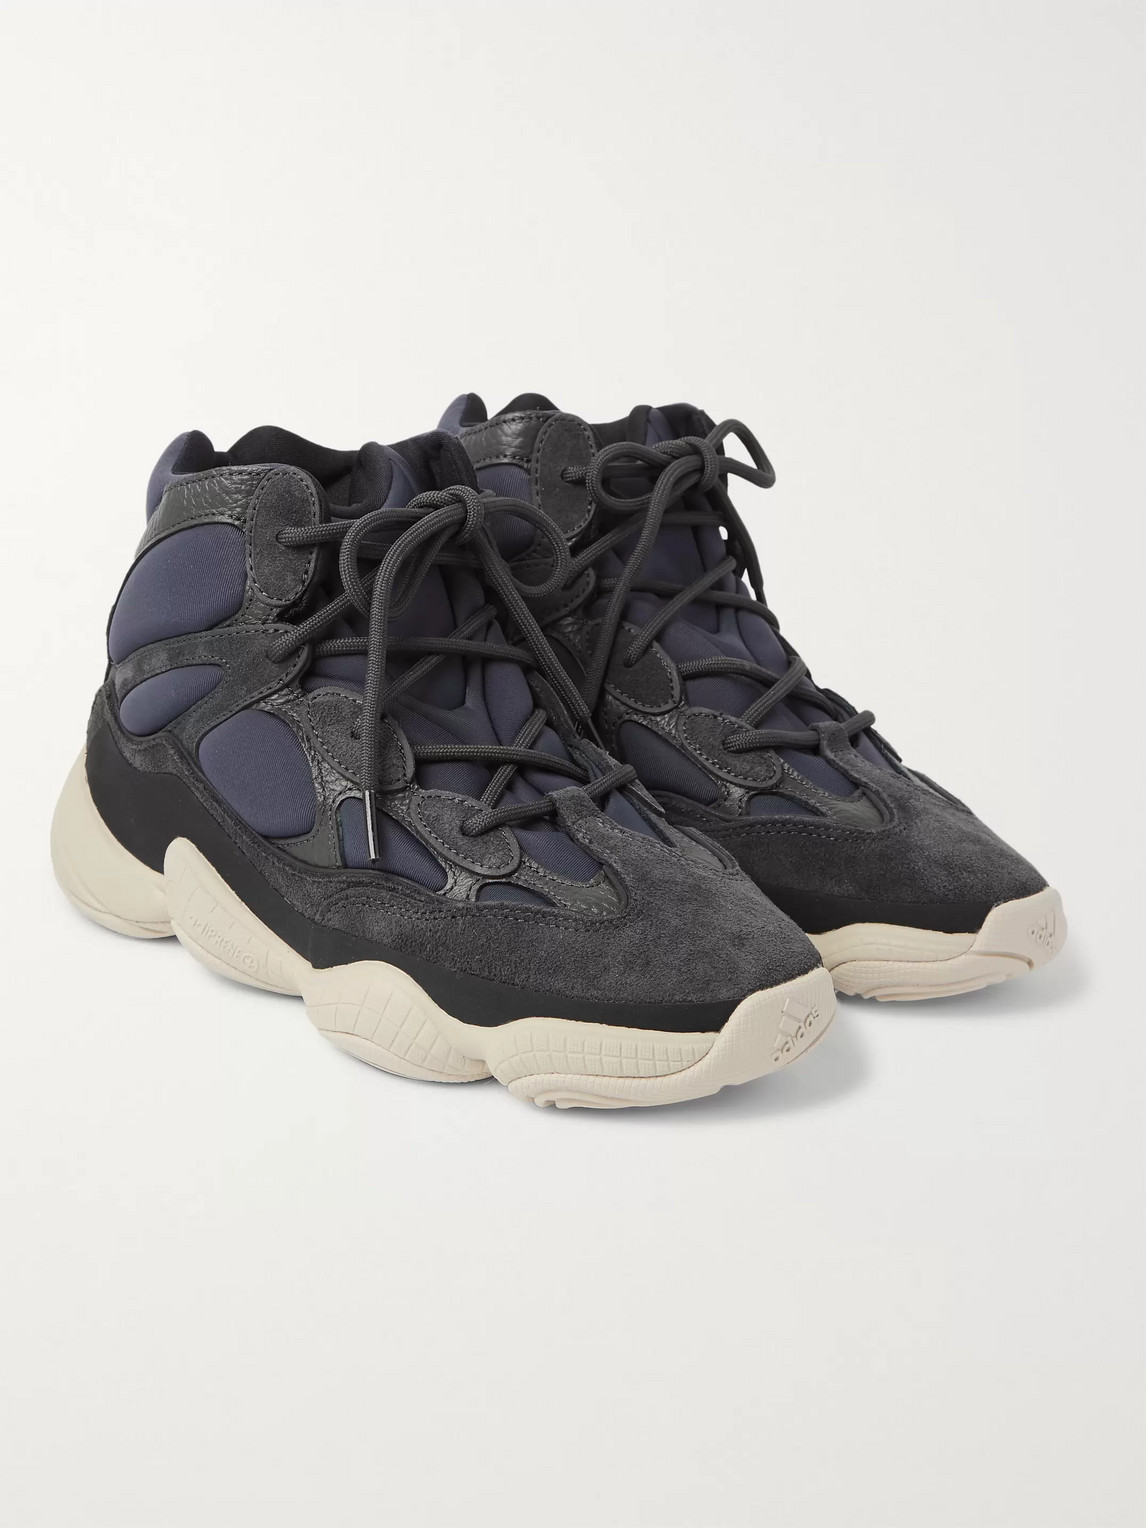 ADIDAS ORIGINALS YEEZY HIGH 500 NEOPRENE, SUEDE AND LEATHER HIGH-TOP trainers